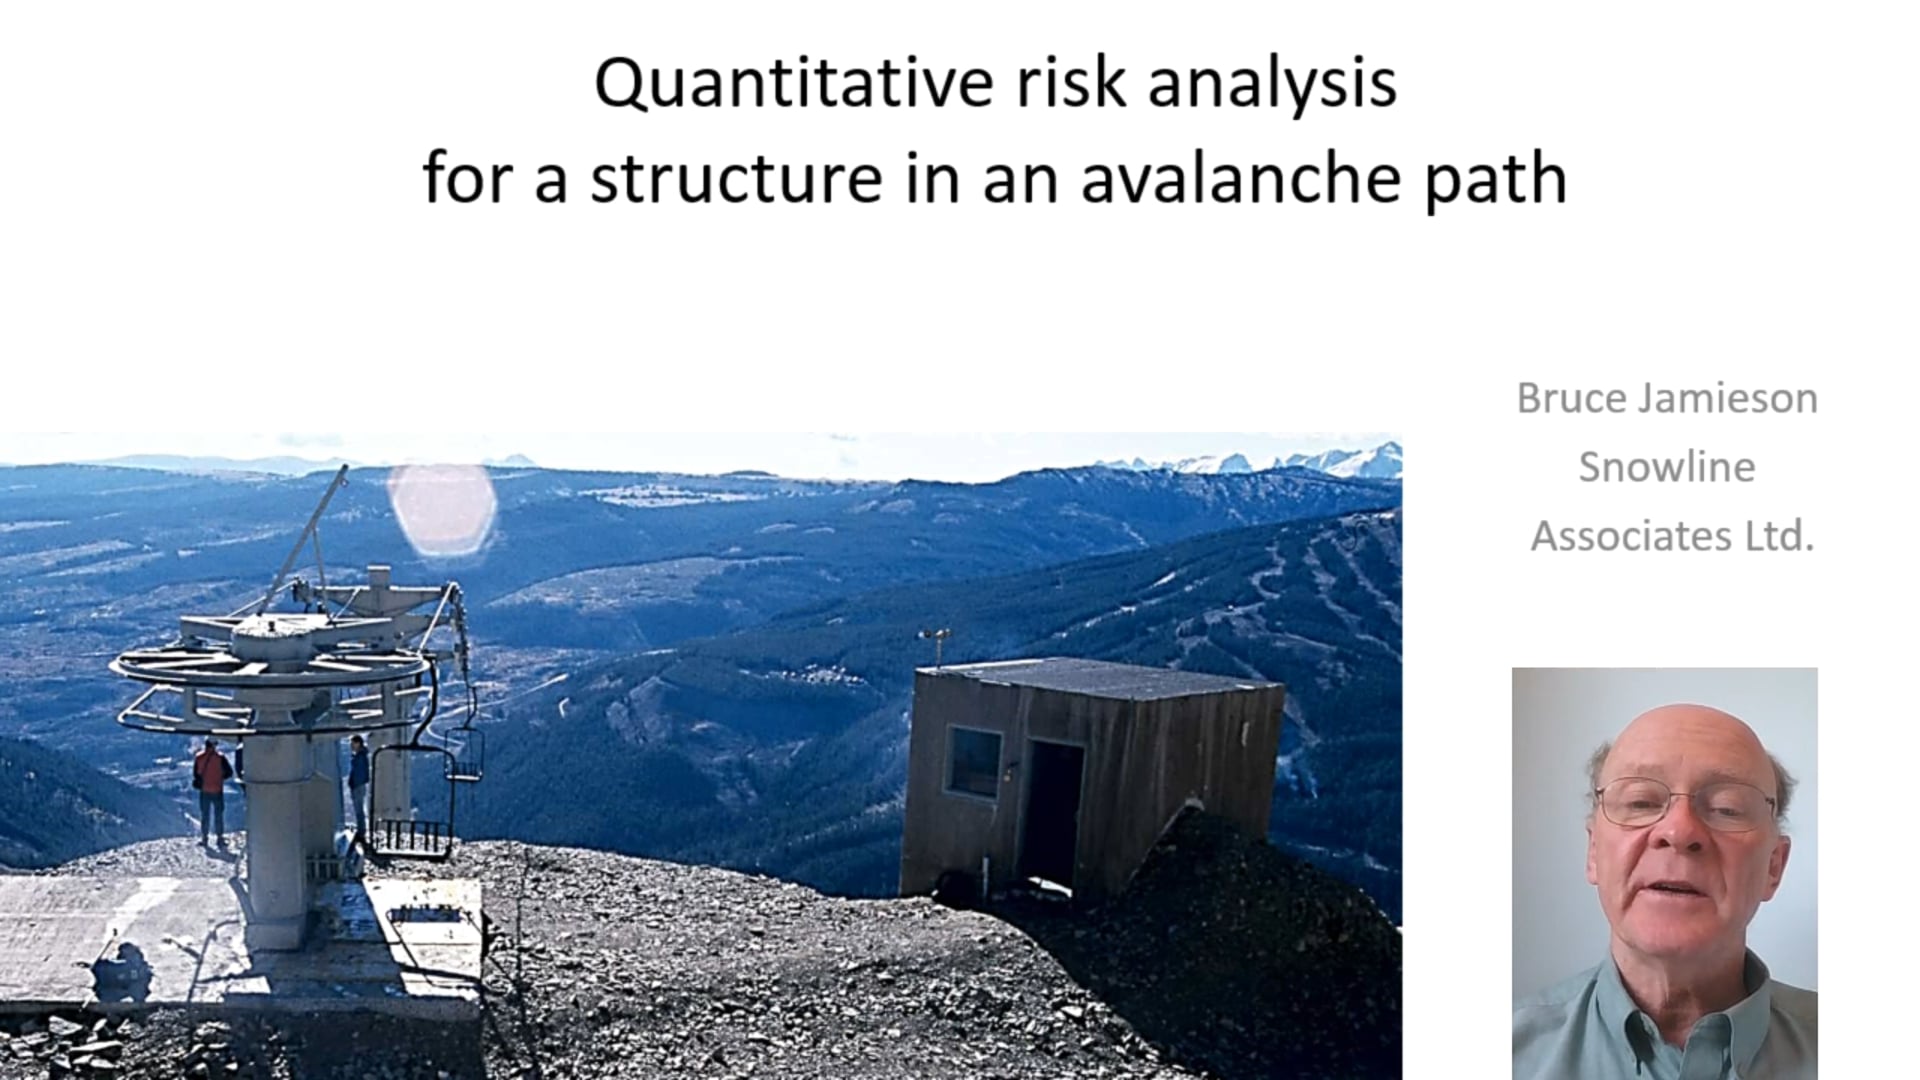 Quantitative risk analysis for a structure in an avalanche path